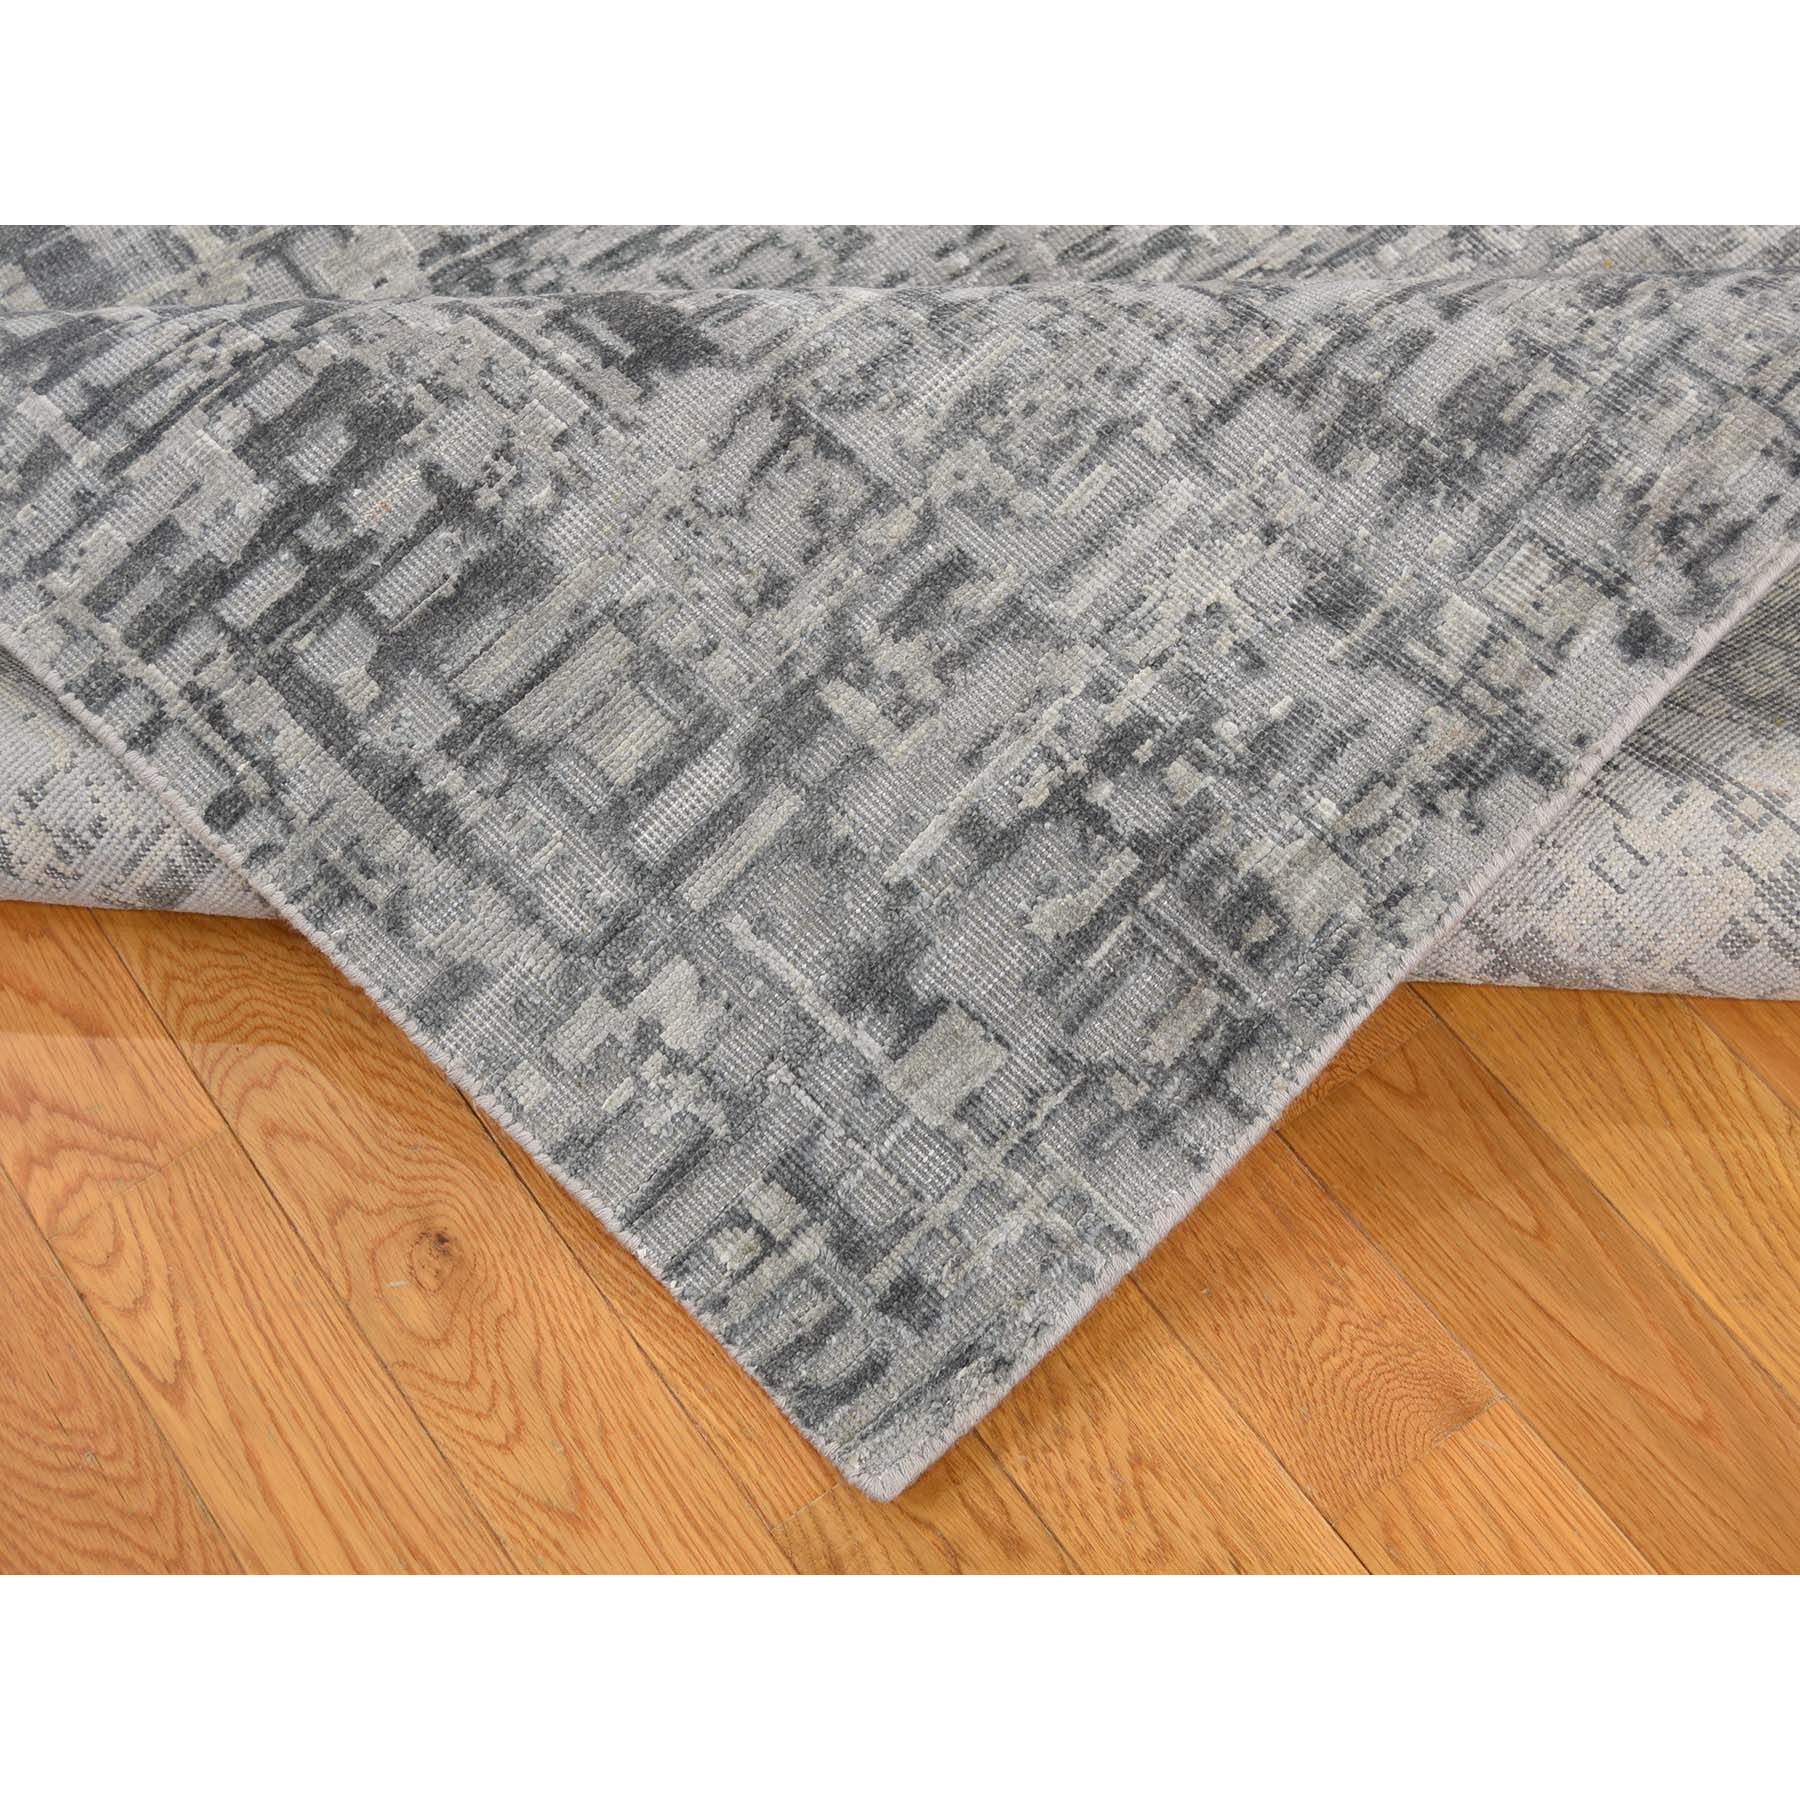 6'2"x9'3" THE MATRIX Pure Silk with Textured Wool Tone on Tone Hand Woven Rug 